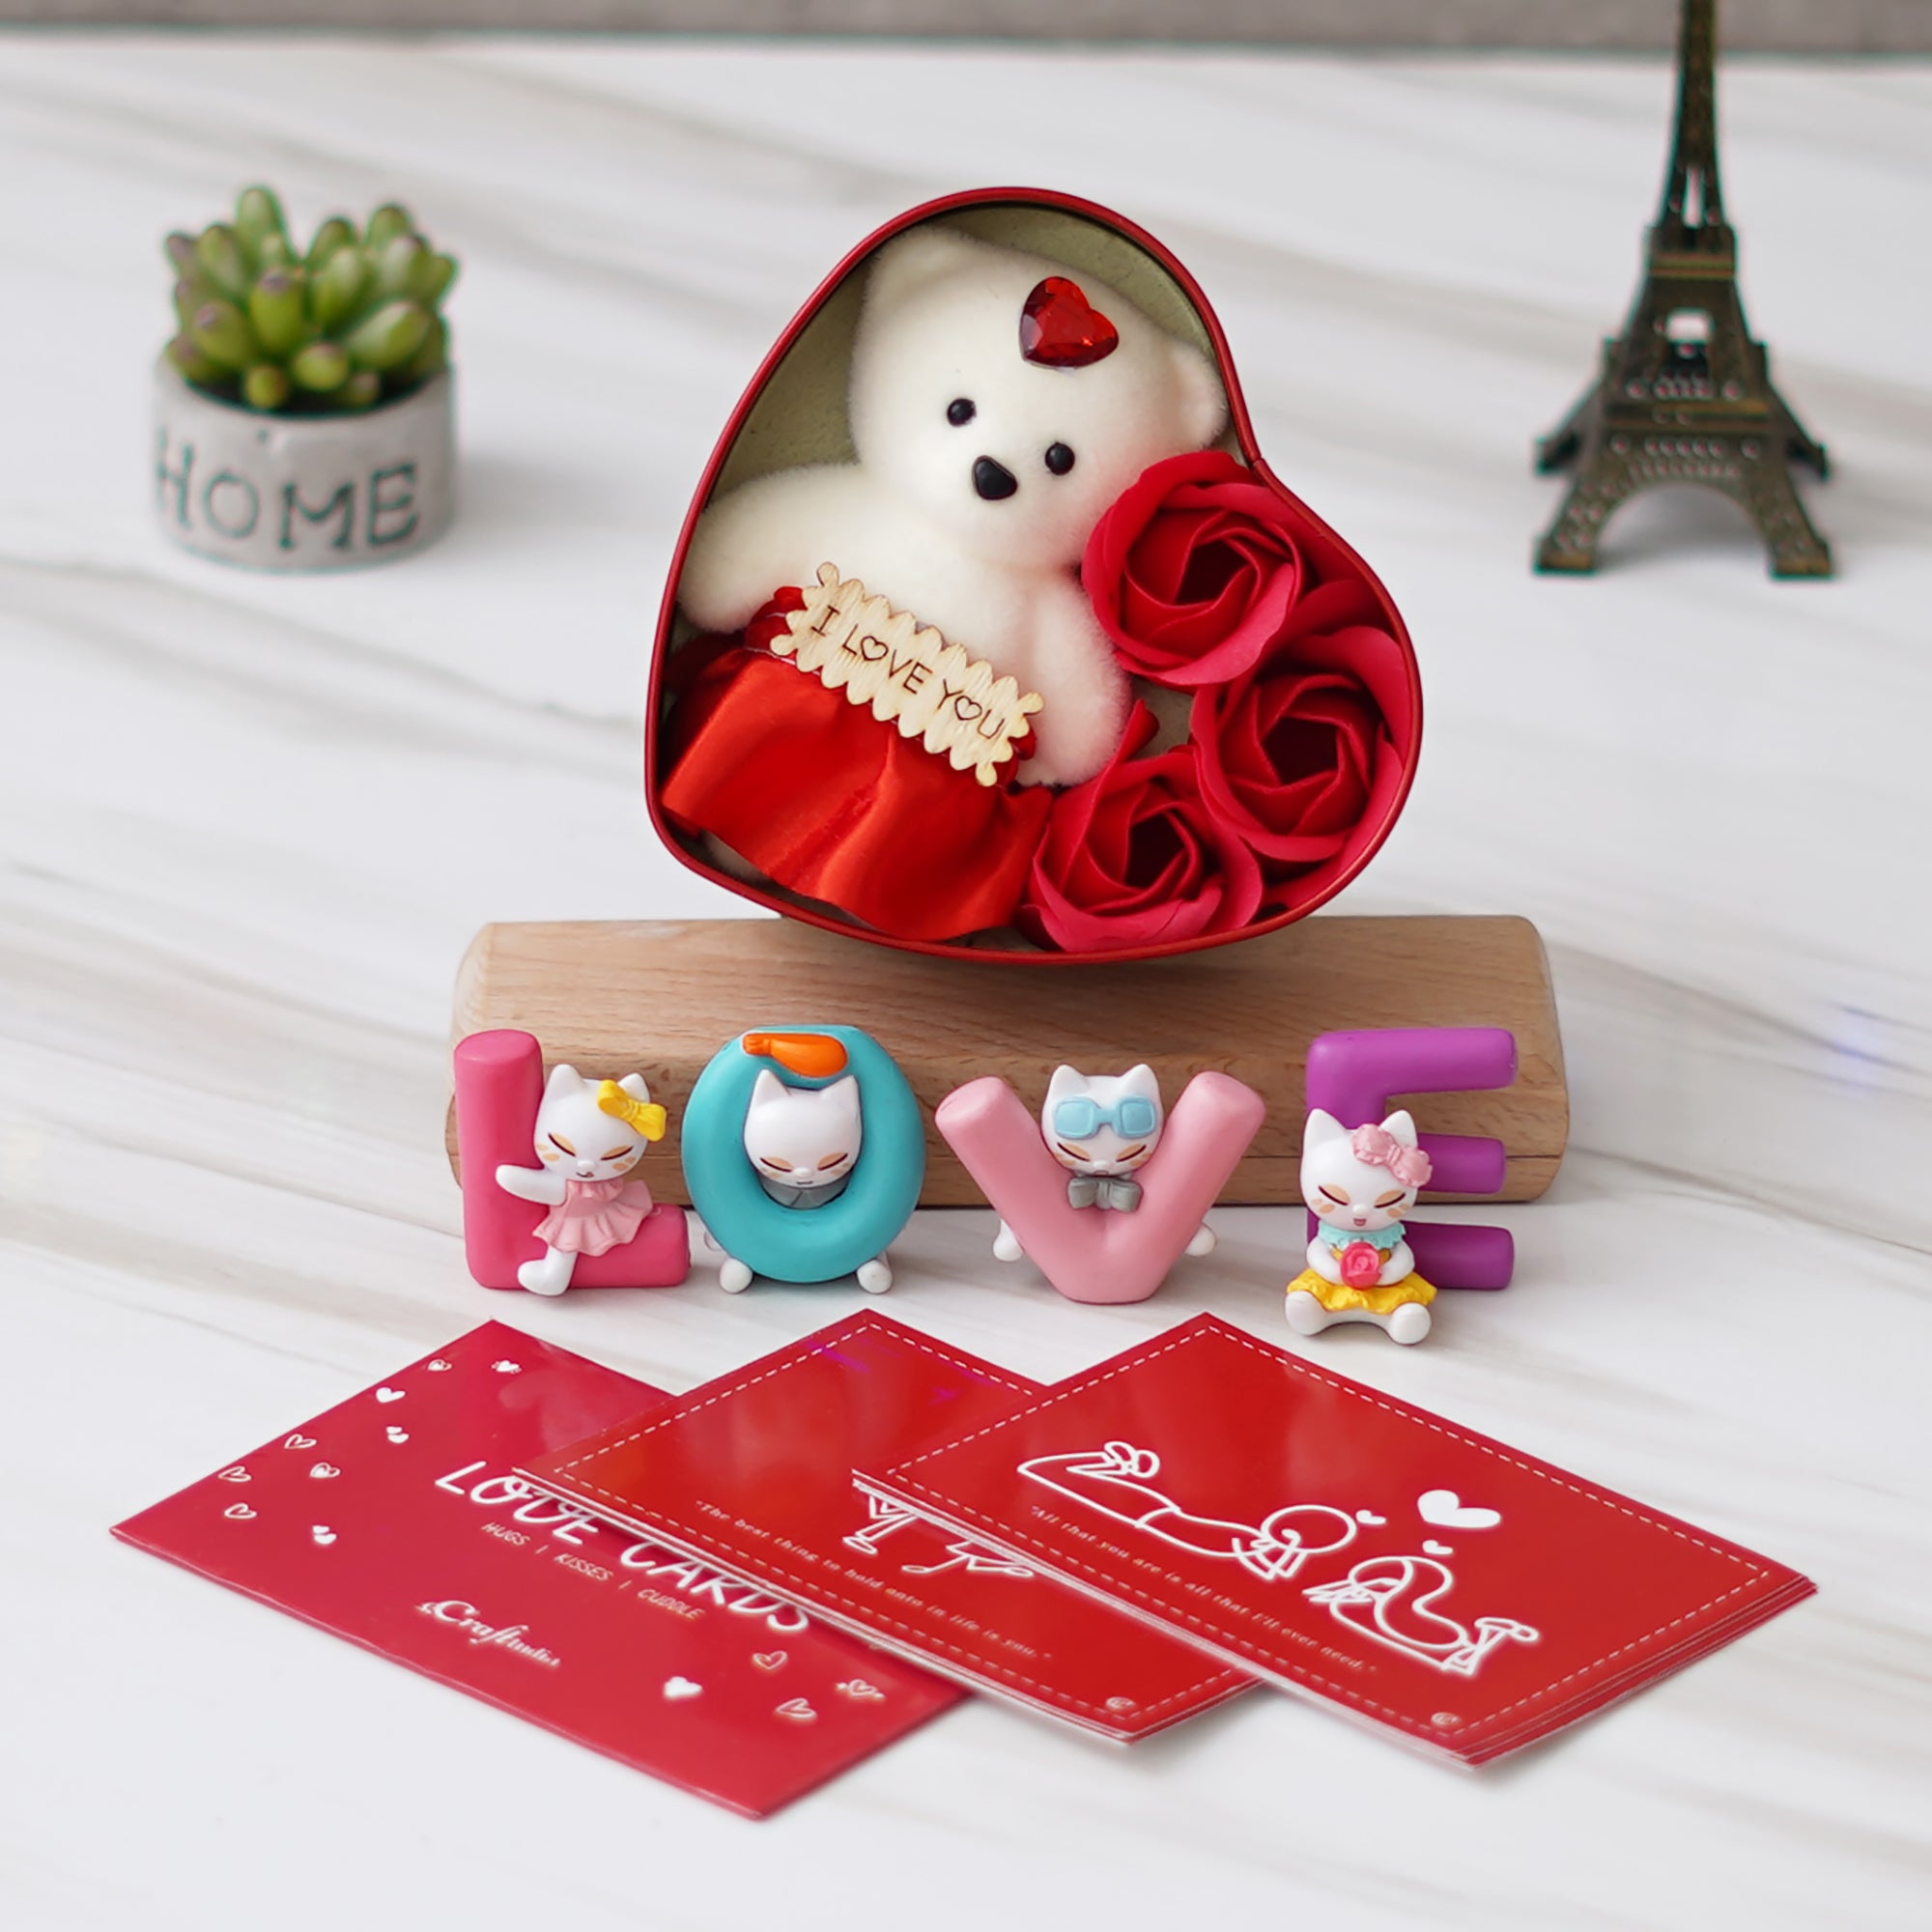 Valentine Combo of Pack of 8 Love Gift Cards, Heart Shaped Gift Box Set with White Teddy and Red Roses, "Love" Animated Characters Showpiece